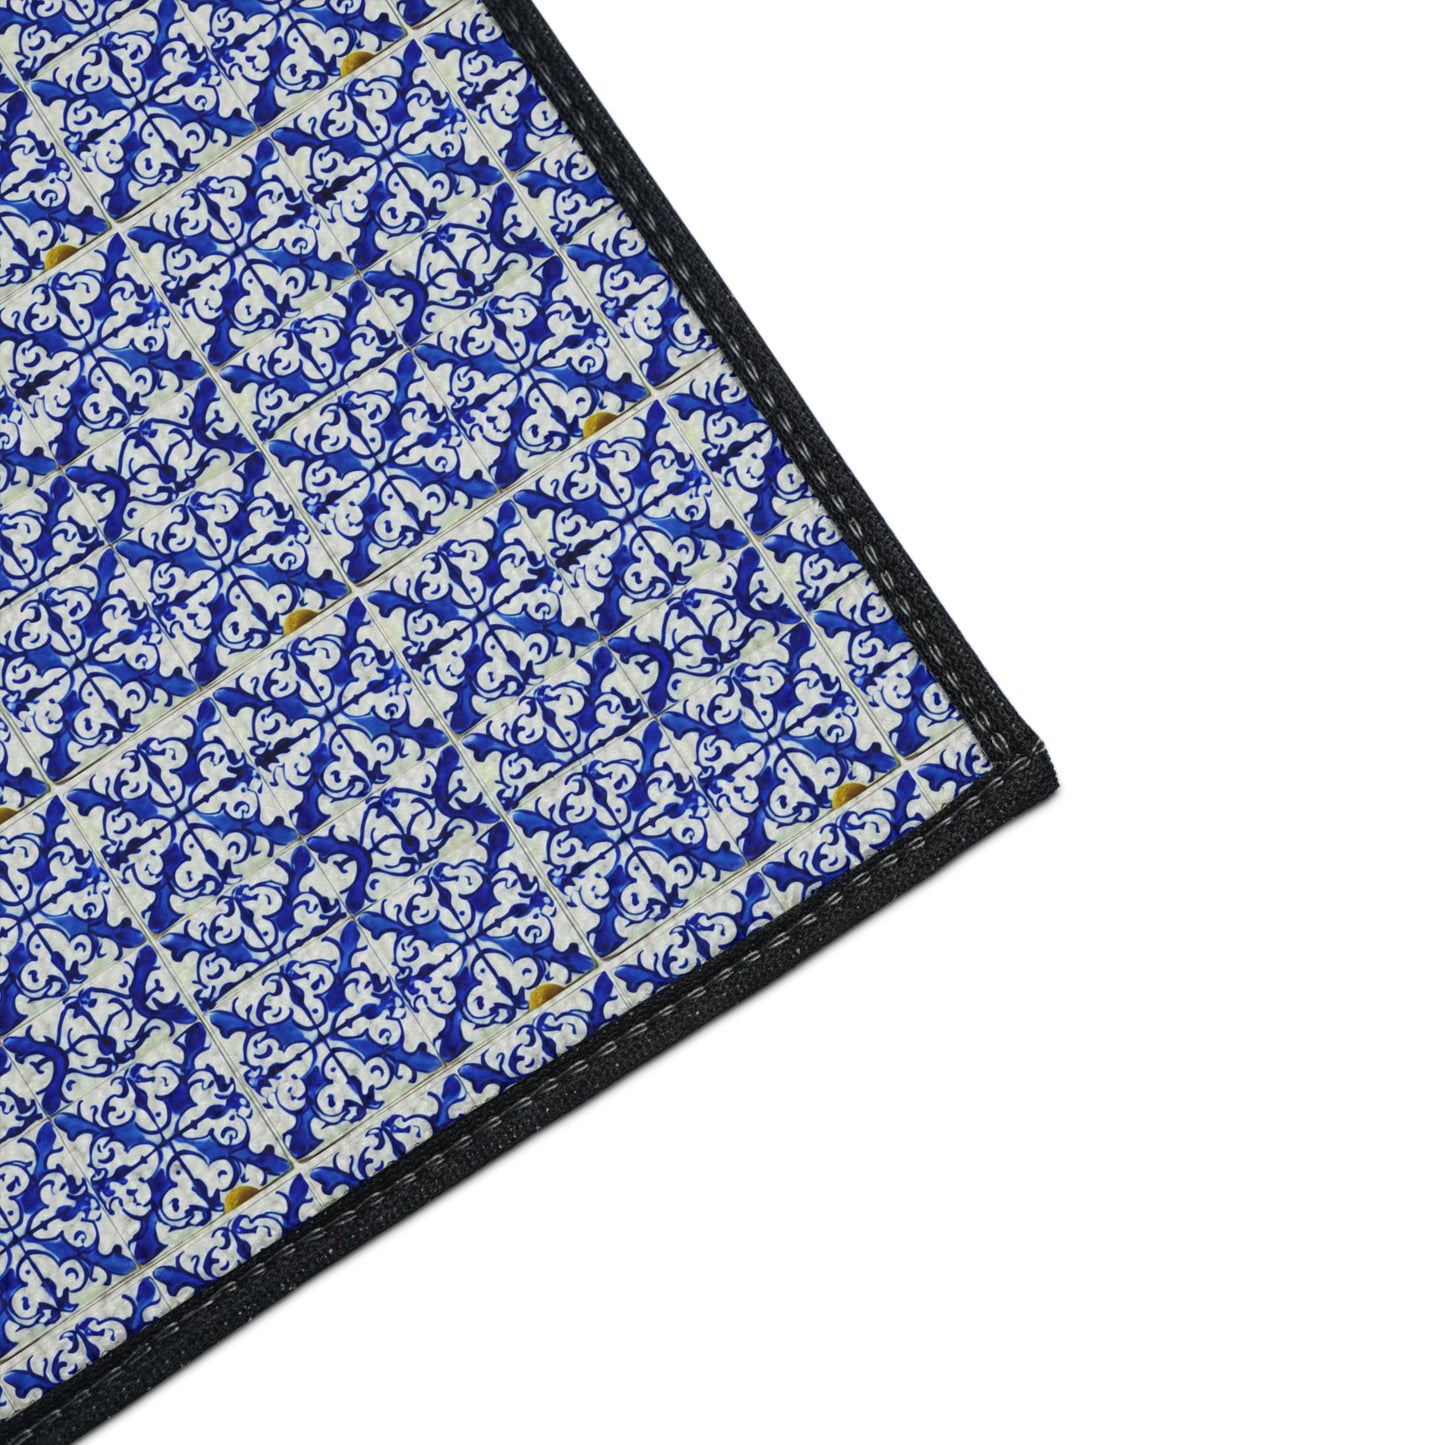 Blue and White Iron Gate Pattern Vintage Portugal Welcome Indoor Outdoor Heavy Duty Floor Mat